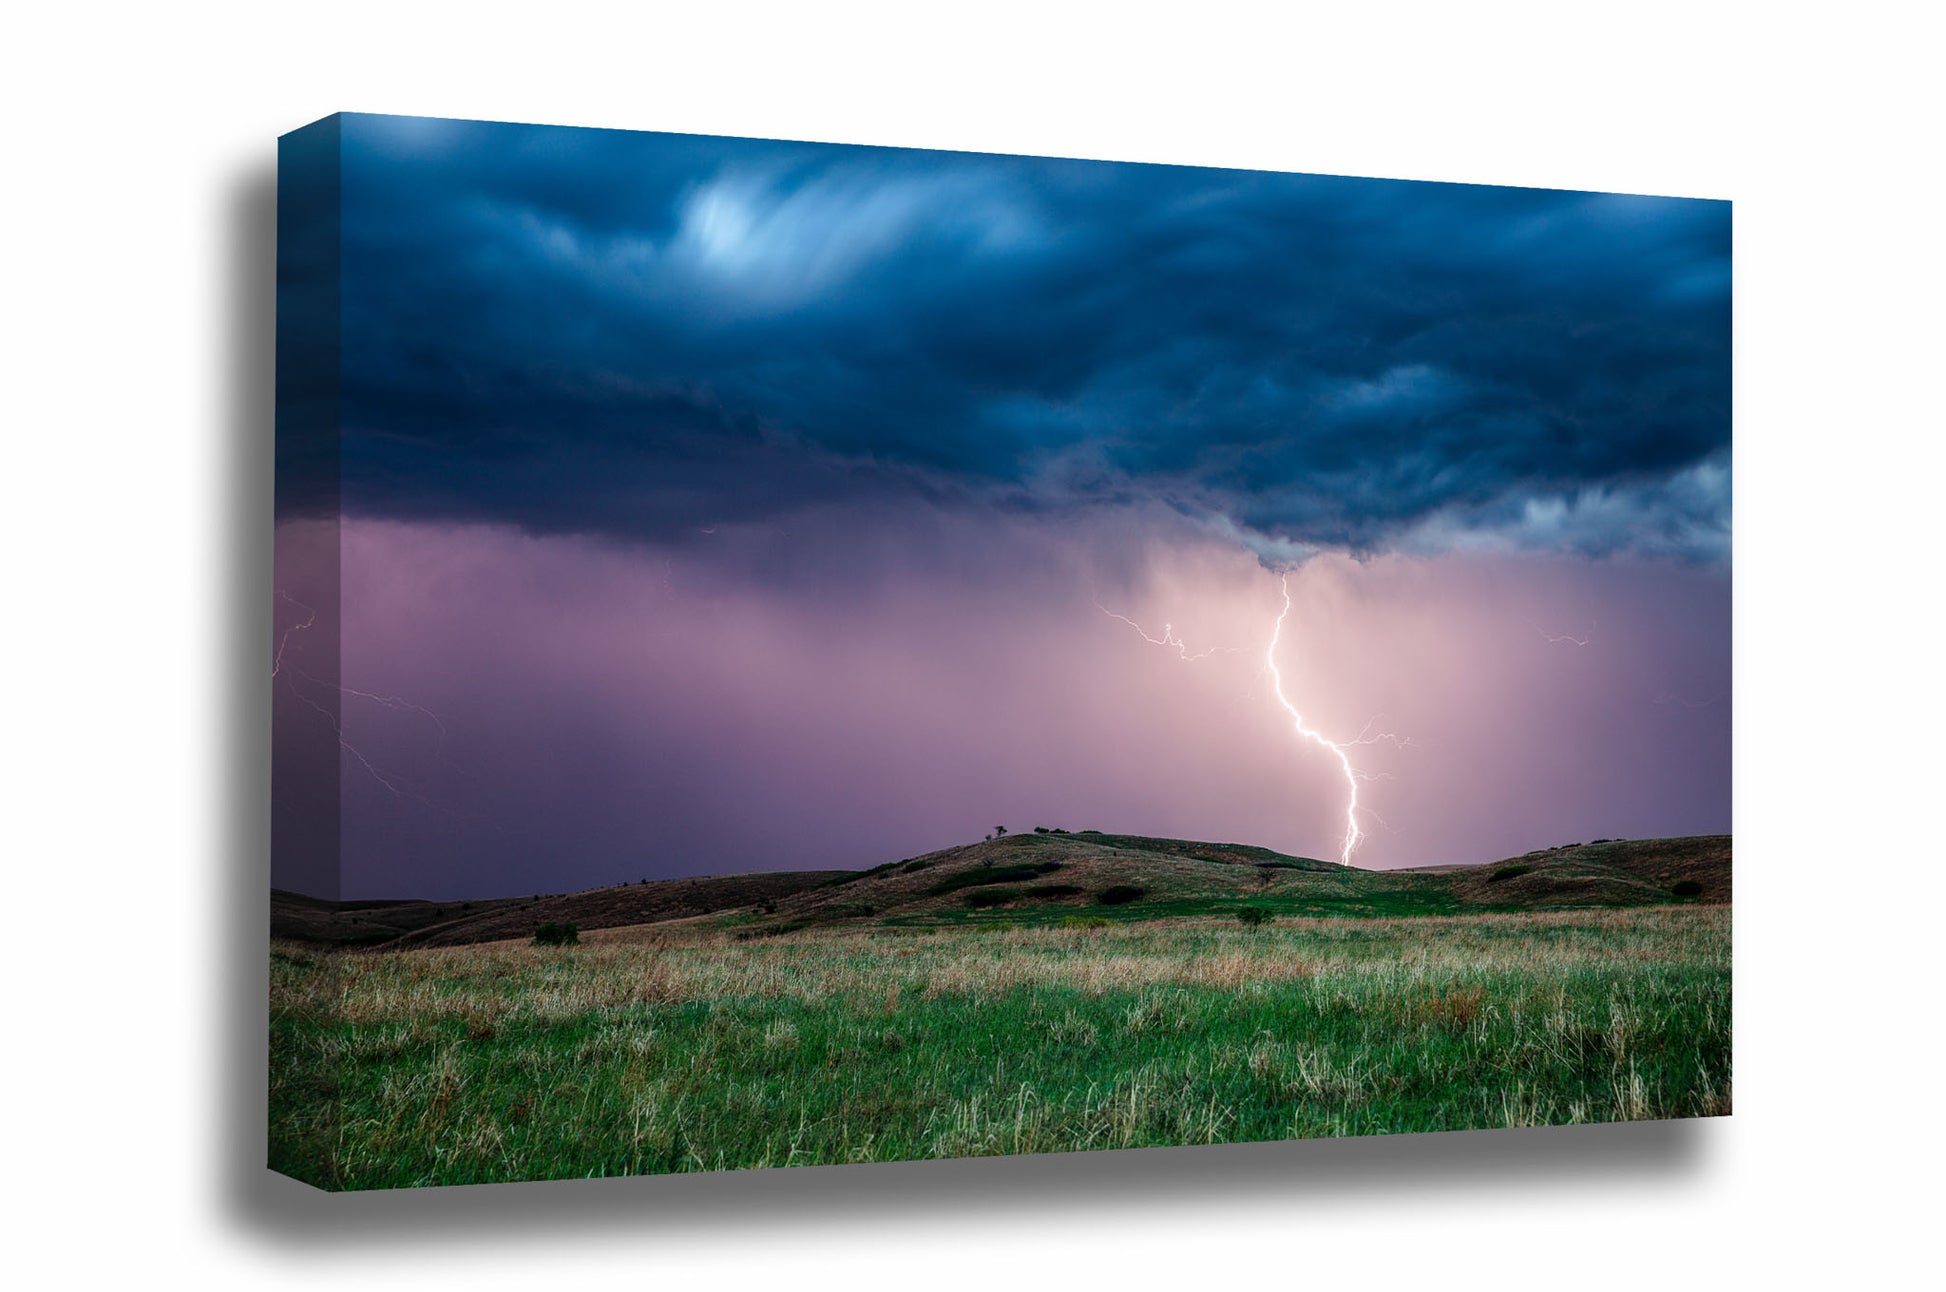 Storm canvas wall art of lightning striking near a hill on a stormy spring night on the plains of Kansas by Sean Ramsey of Southern Plains Photography.